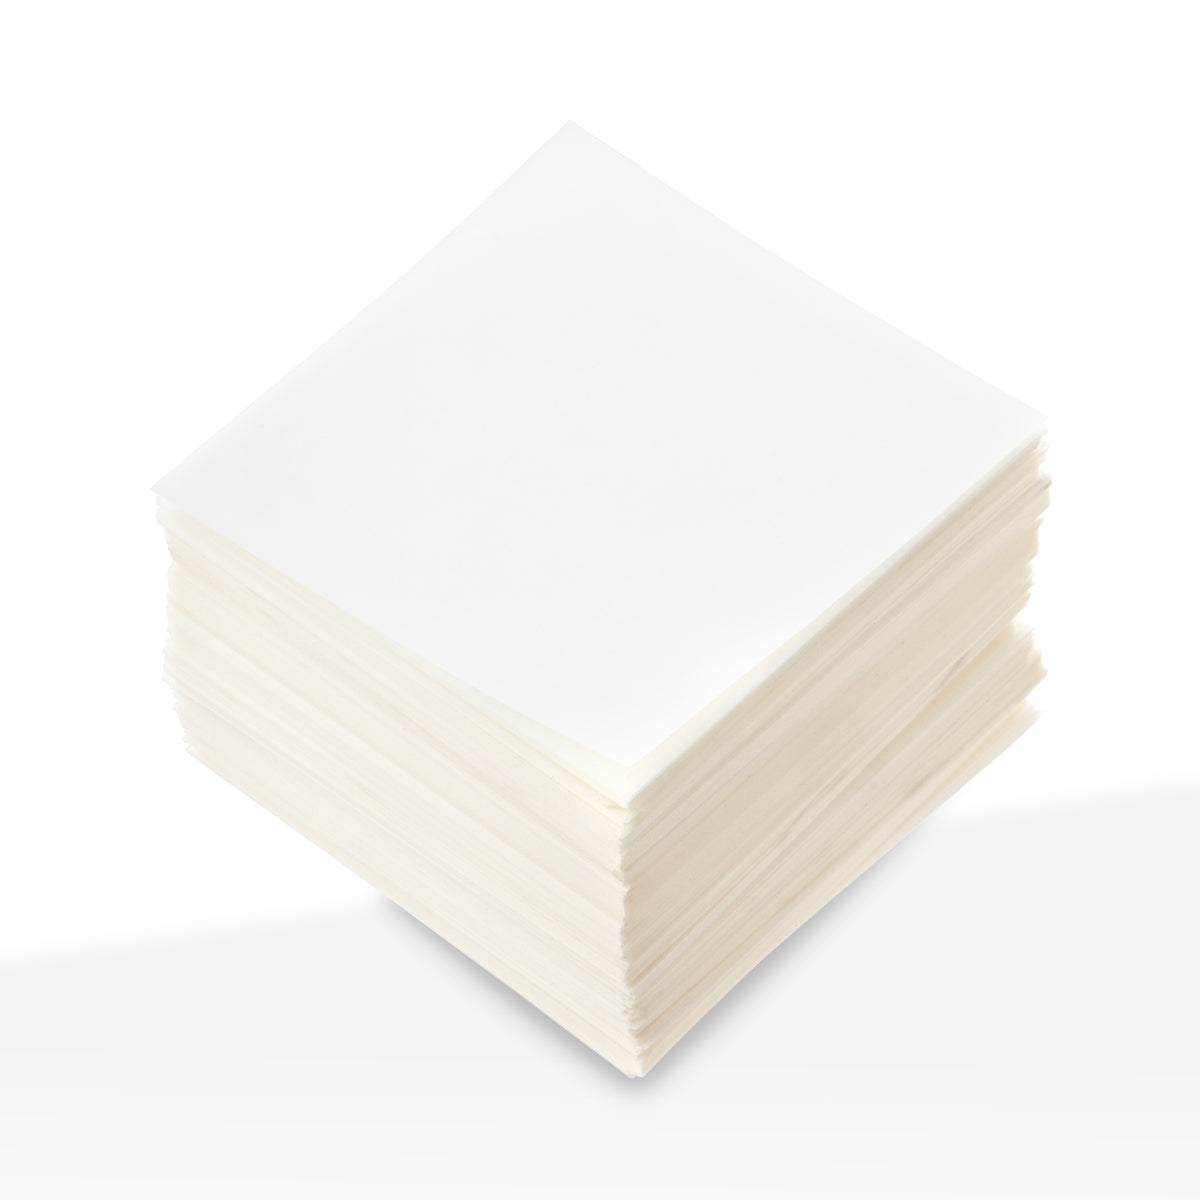 BrightBay | White 3in x 3in Parchment Paper - 1,000 Count